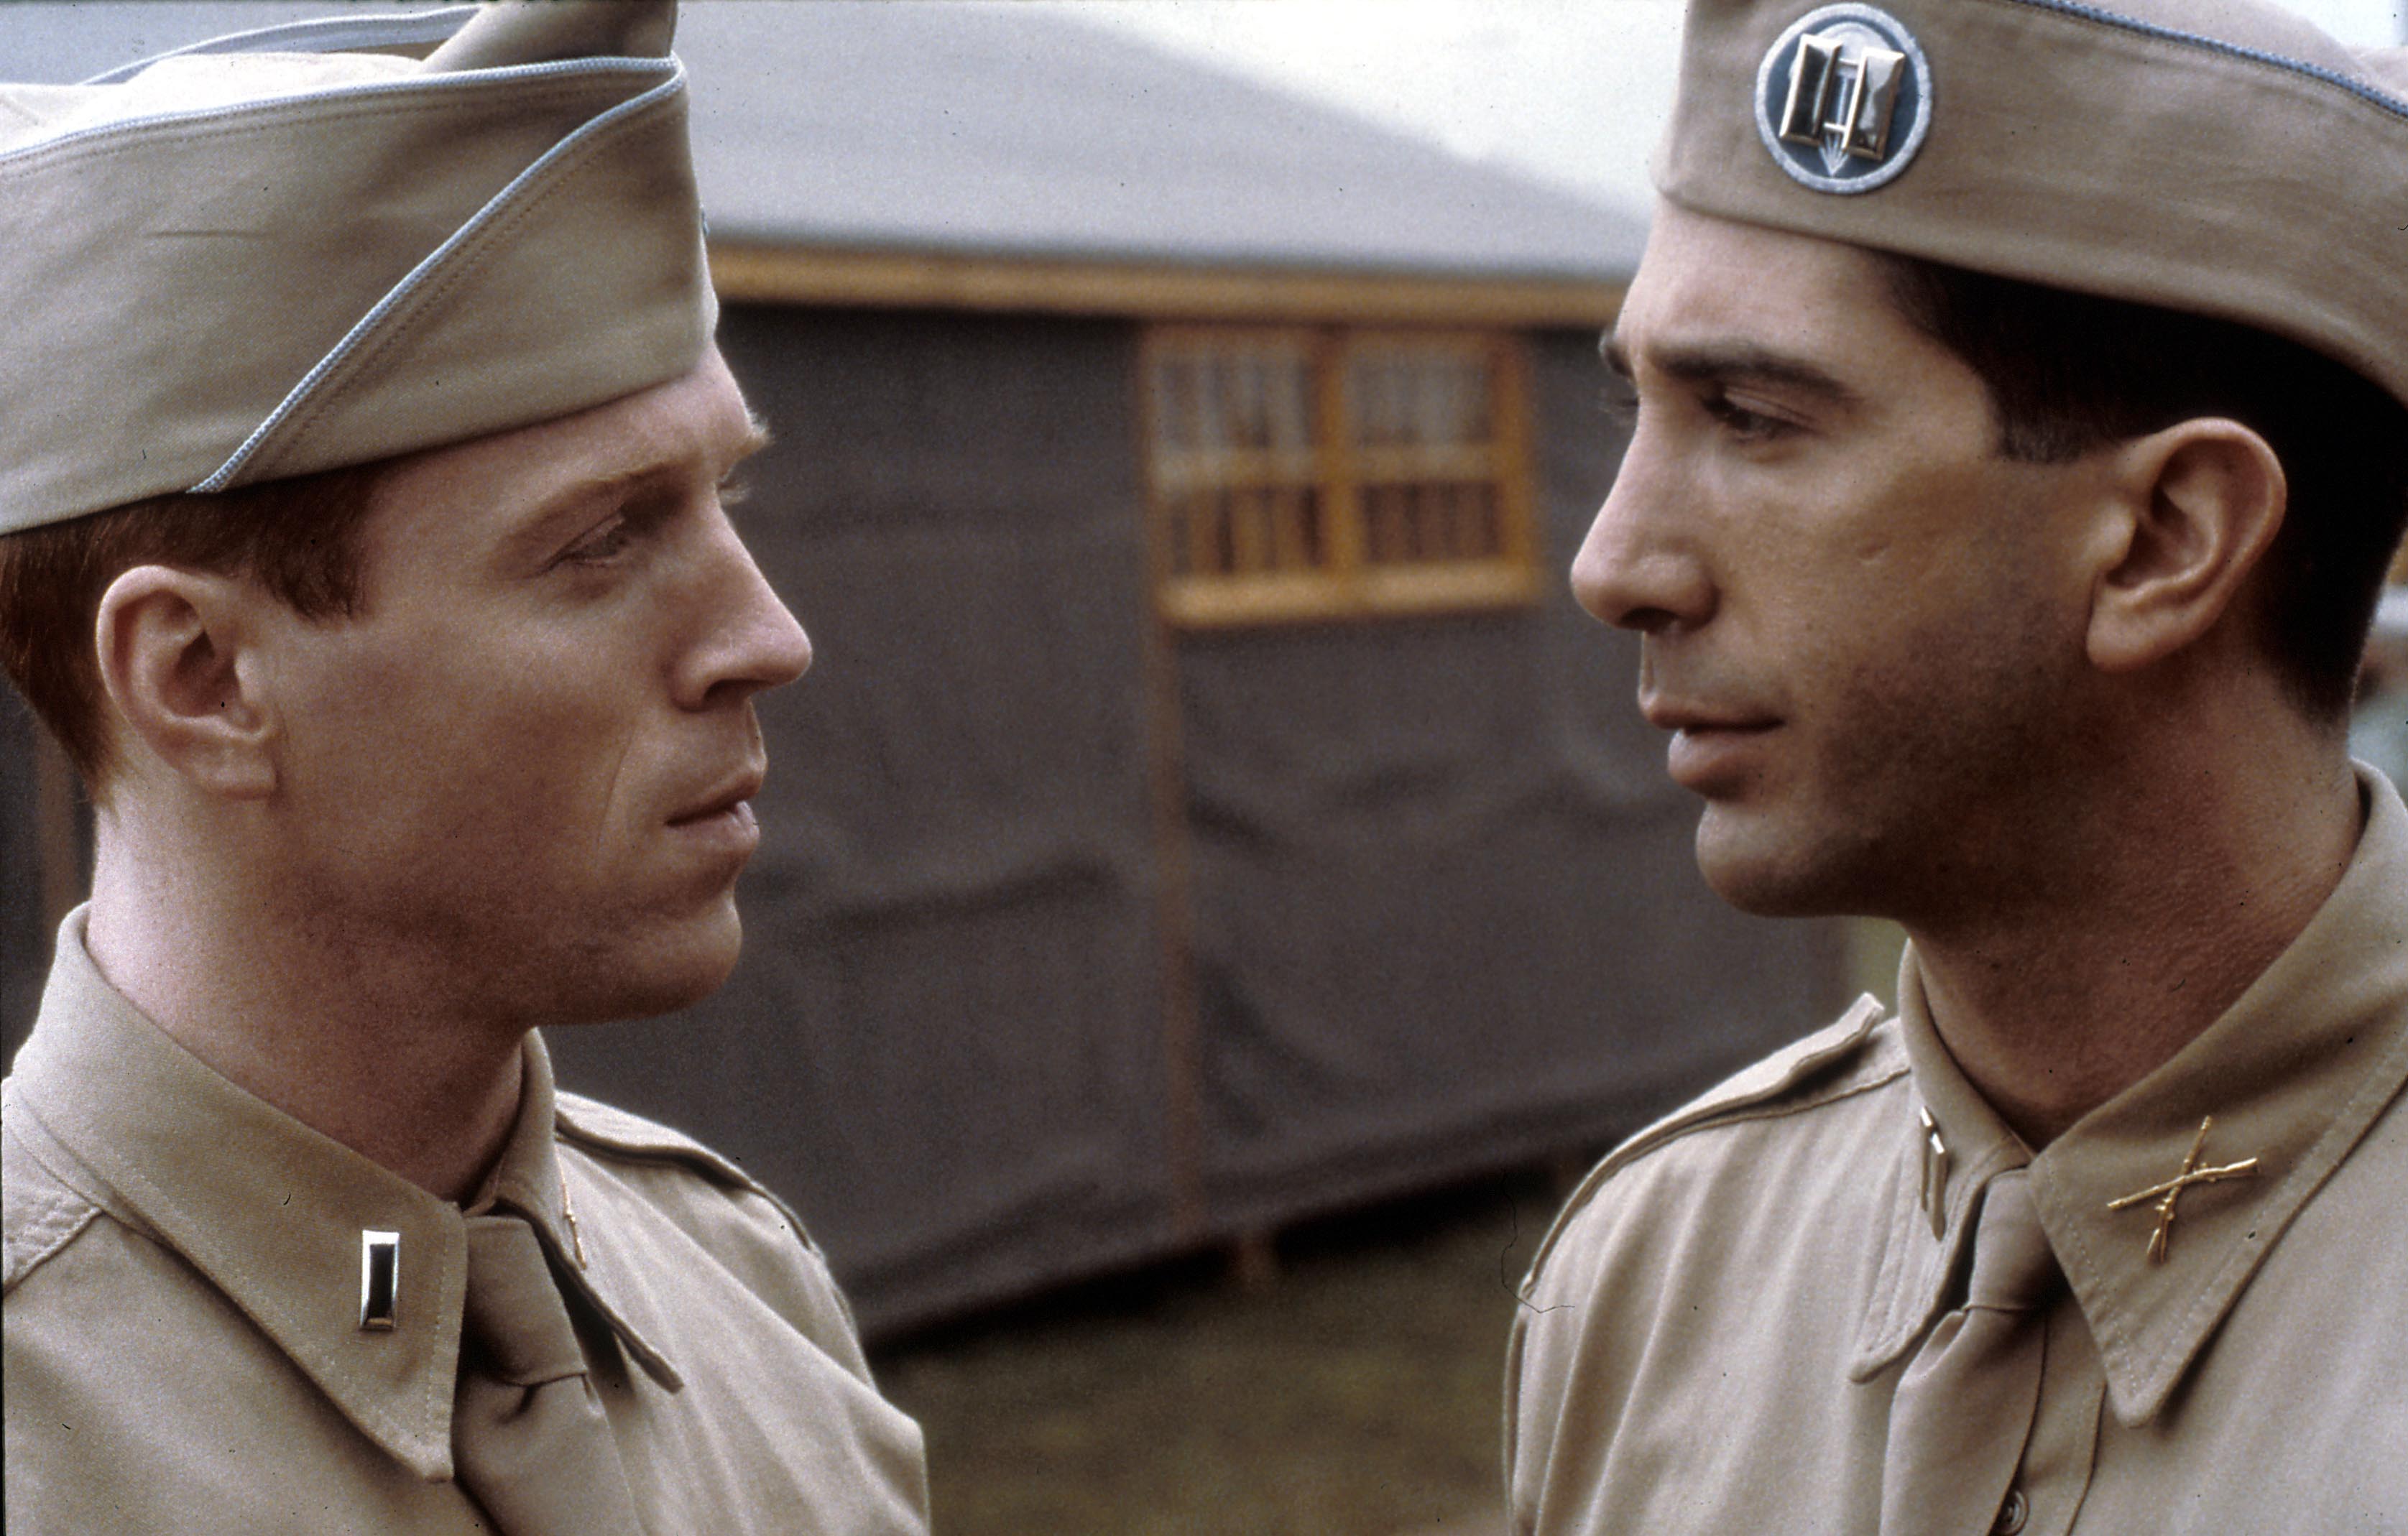 <p>The 10-part 2001 miniseries "Band of Brothers" -- which centers around the U.S. Army 101st Airborne Division during WWII -- featured an incredible cast including Damian Lewis and David Schwimmer (pictured), Michael Fassbender, Ron Livingston, Donnie Wahlberg and Neal McDonough. </p><p>The HBO project, which was produced by Tom Hanks and Steven Spielberg and served as the first a trio of war projects (that also include 2010's "The Pacific" and <a href="https://www.wonderwall.com/celebrity/photos/official-first-look-at-masters-of-the-air-the-best-pictures-831283.gallery">2024's "Masters of the Air"</a>) won six Emmys including outstanding miniseries and scored another 13 nominations.</p>